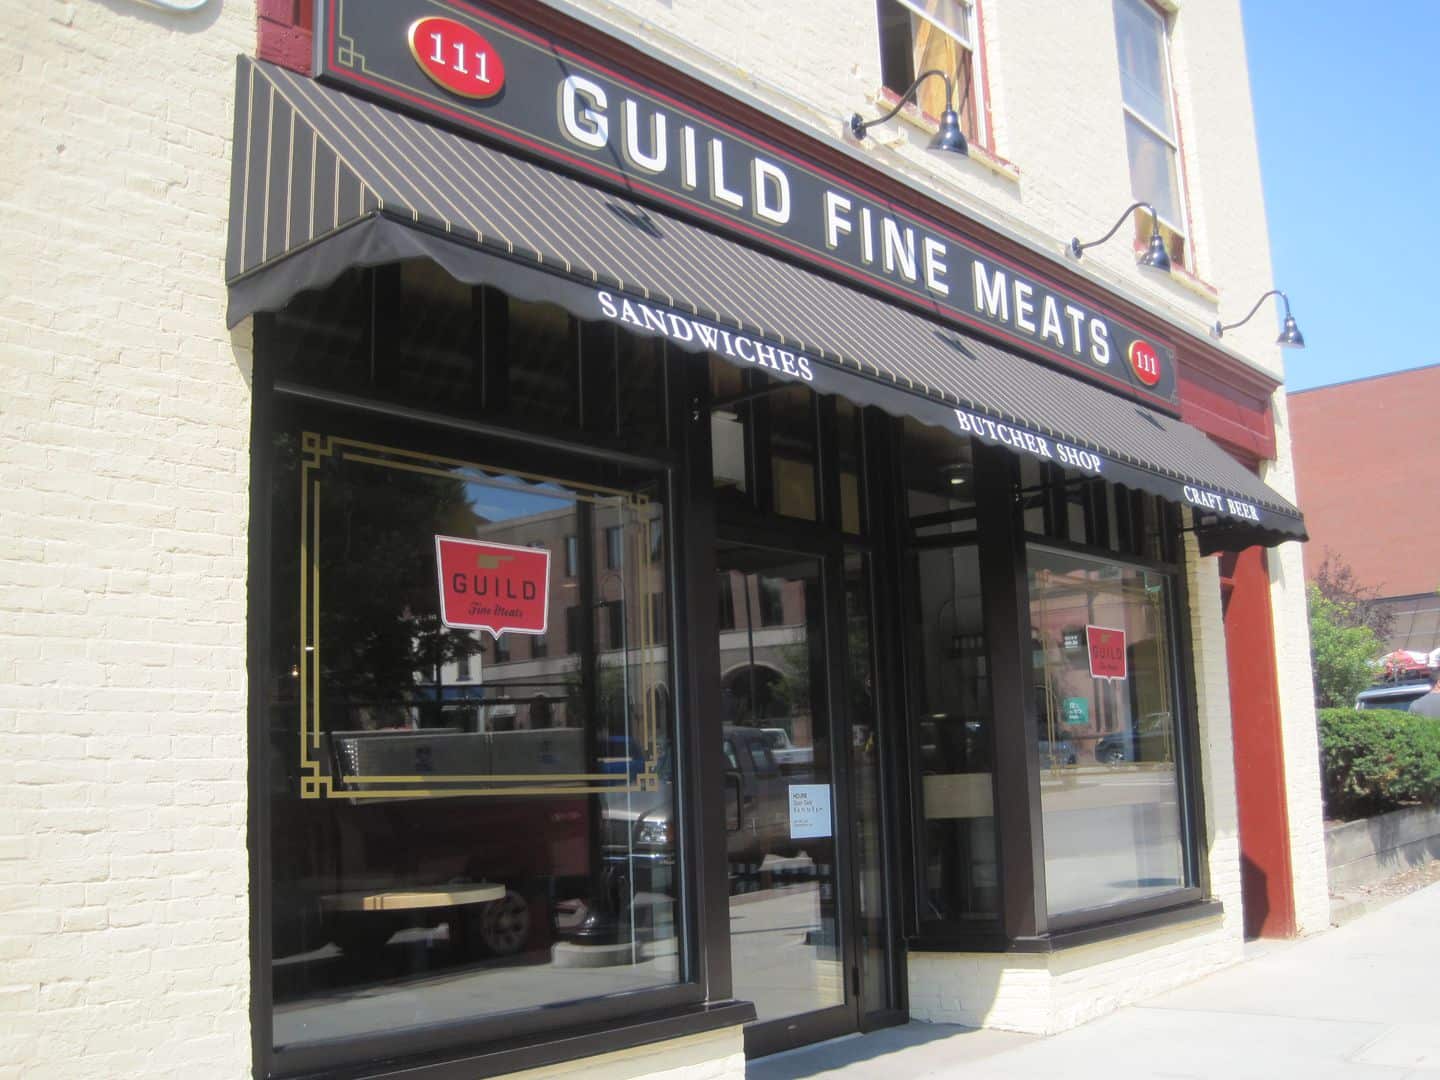 The store front of Guild Fine Meats